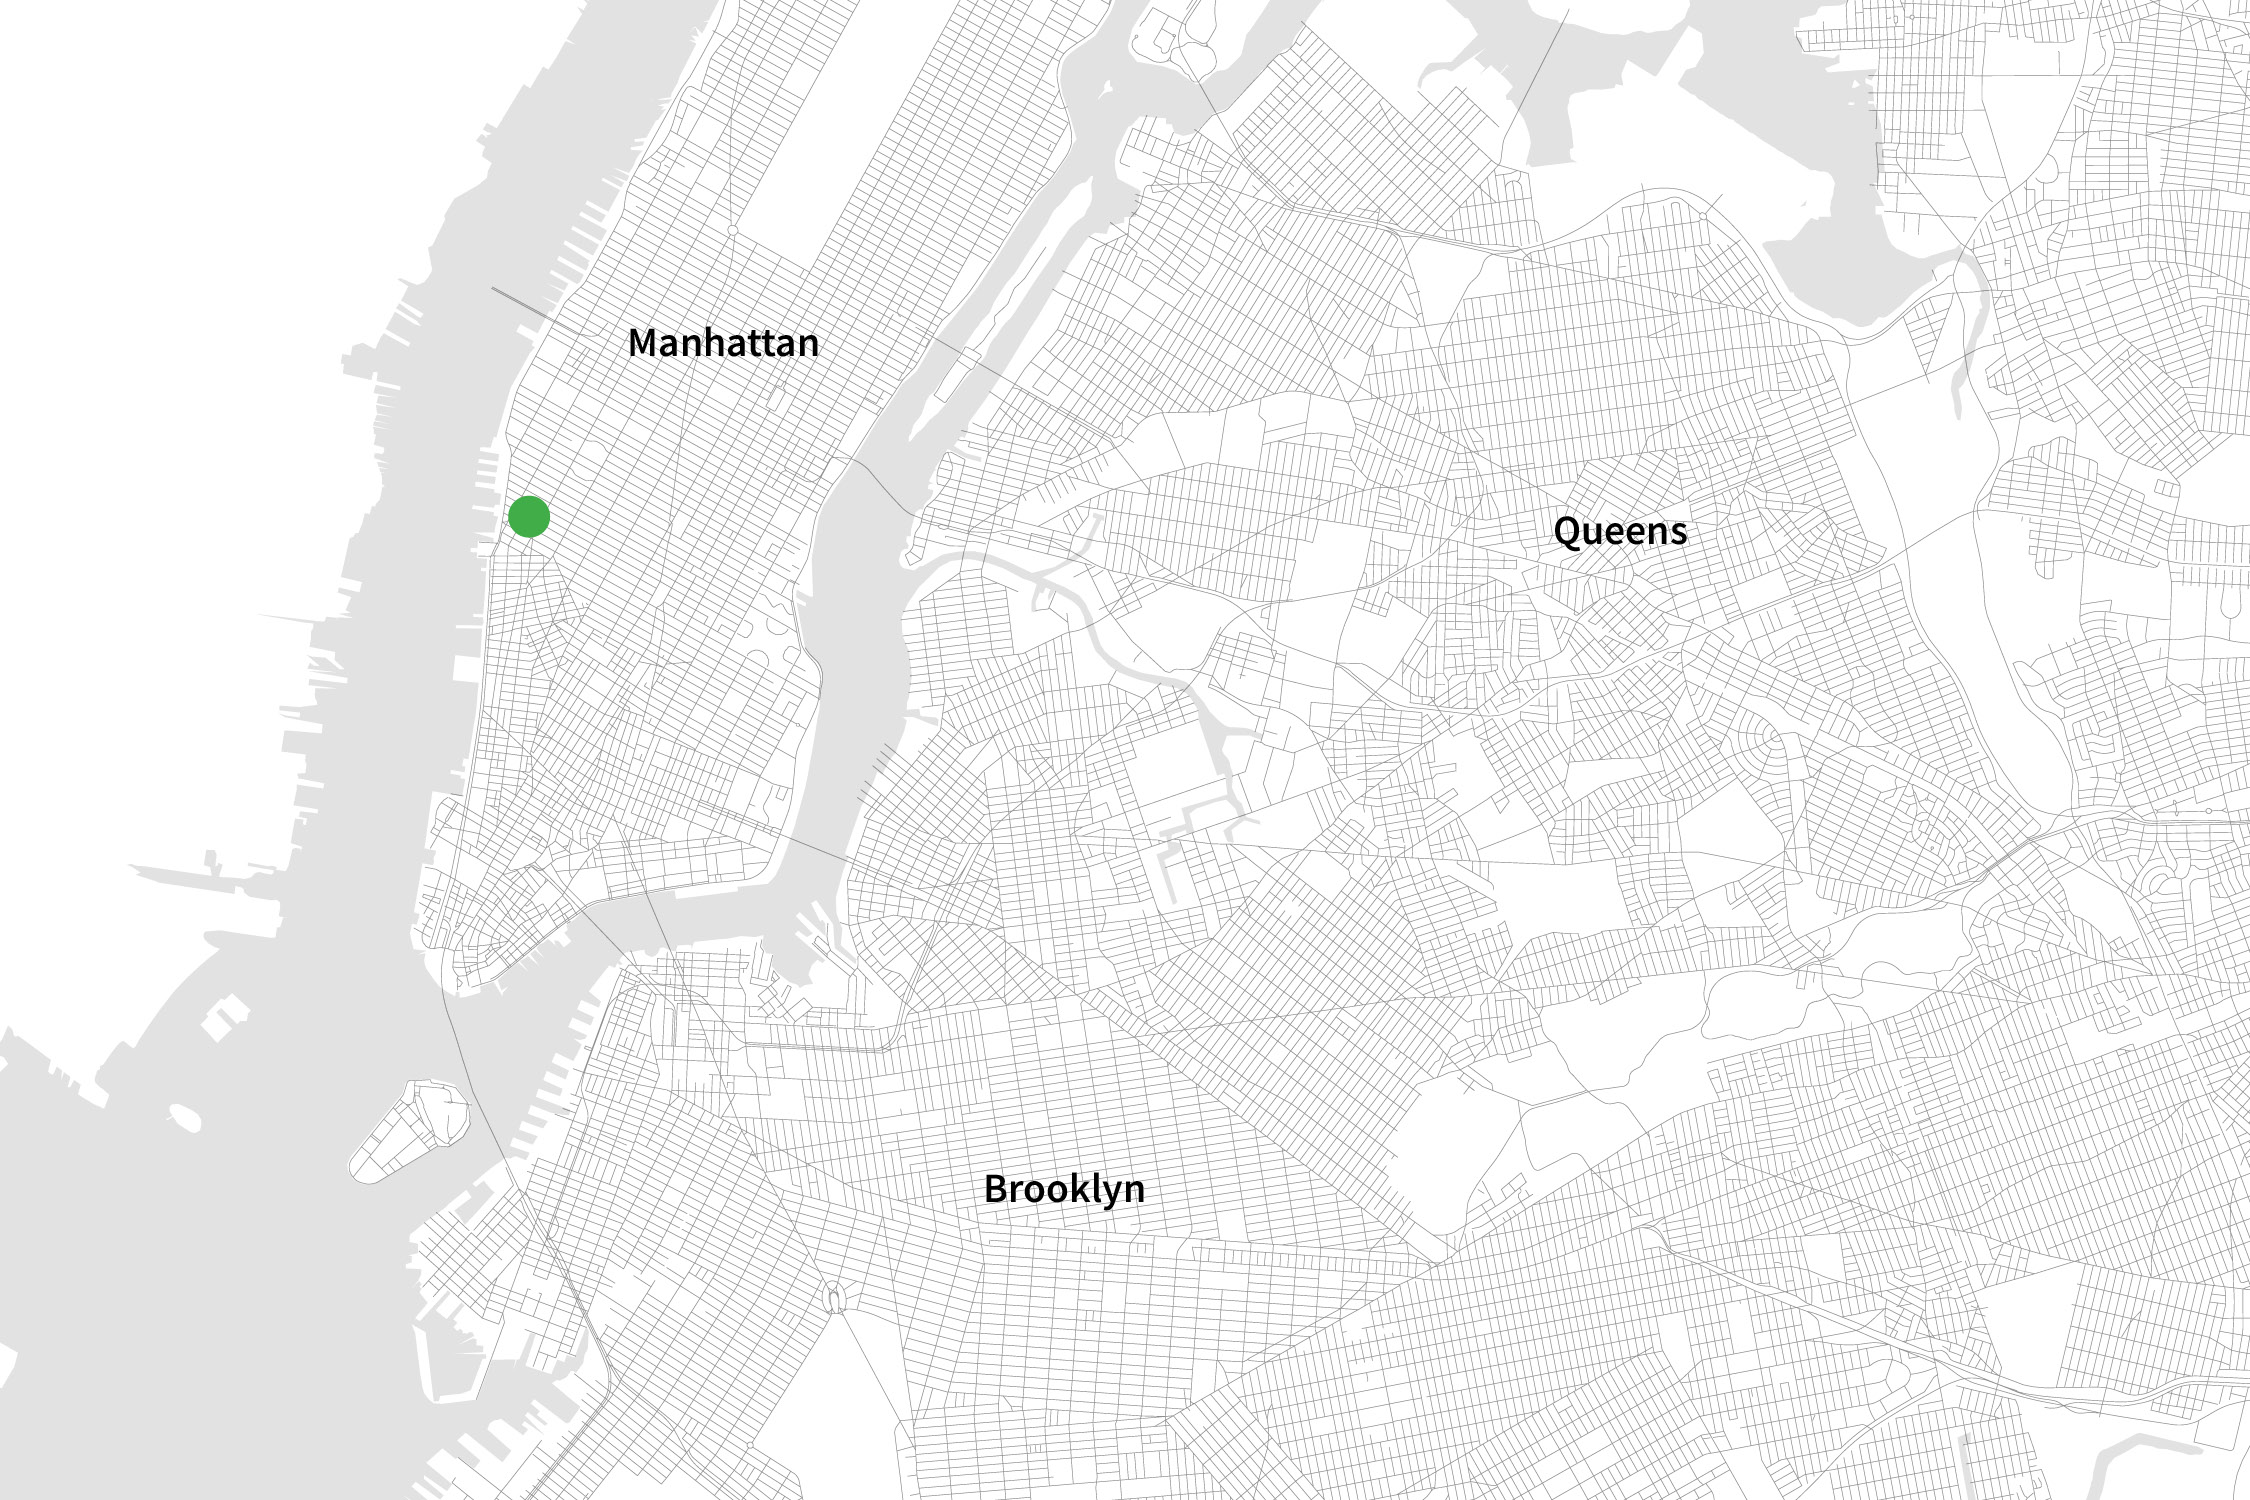 A black and white map of NYC zoomed in to only see some parts of  "Manhattan," "Queens" and "Brooklyn" with a green dot on a street in Manhattan.